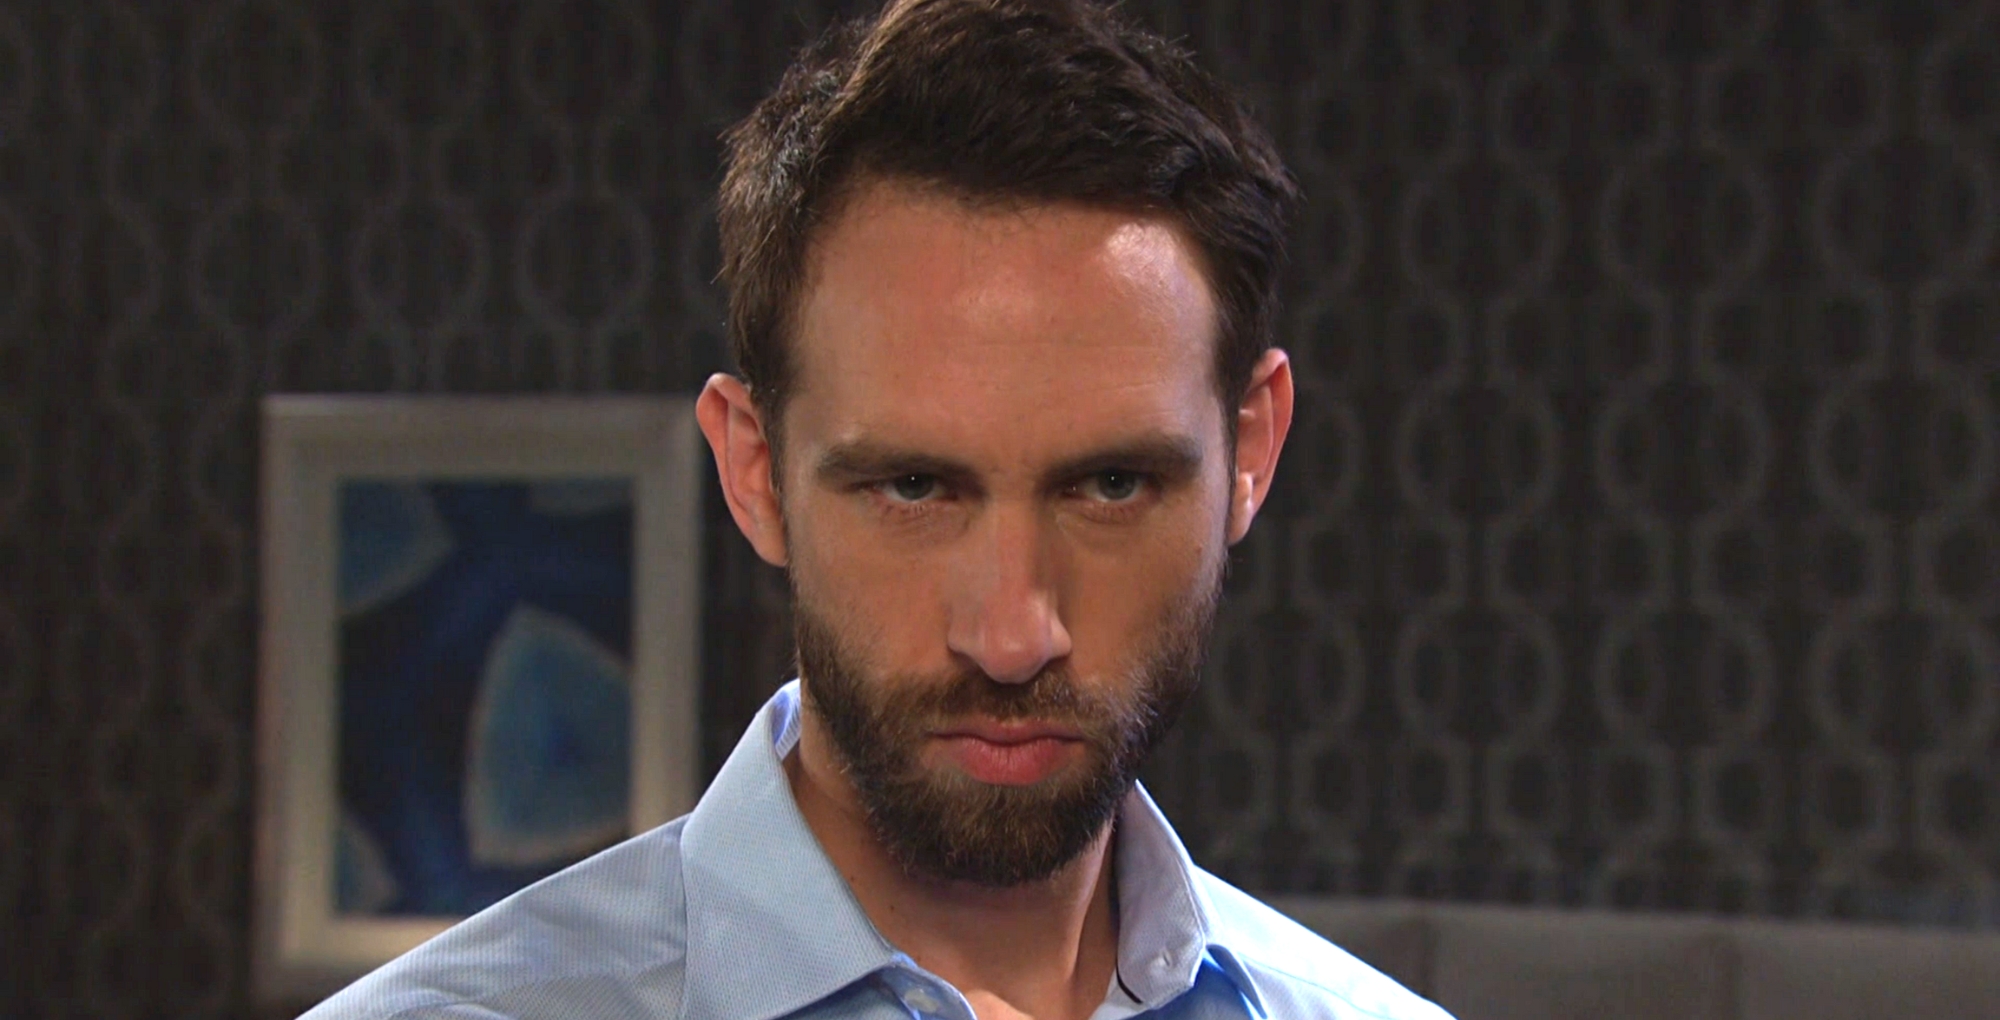 everett lynch on days of our lives looking a bit mad.